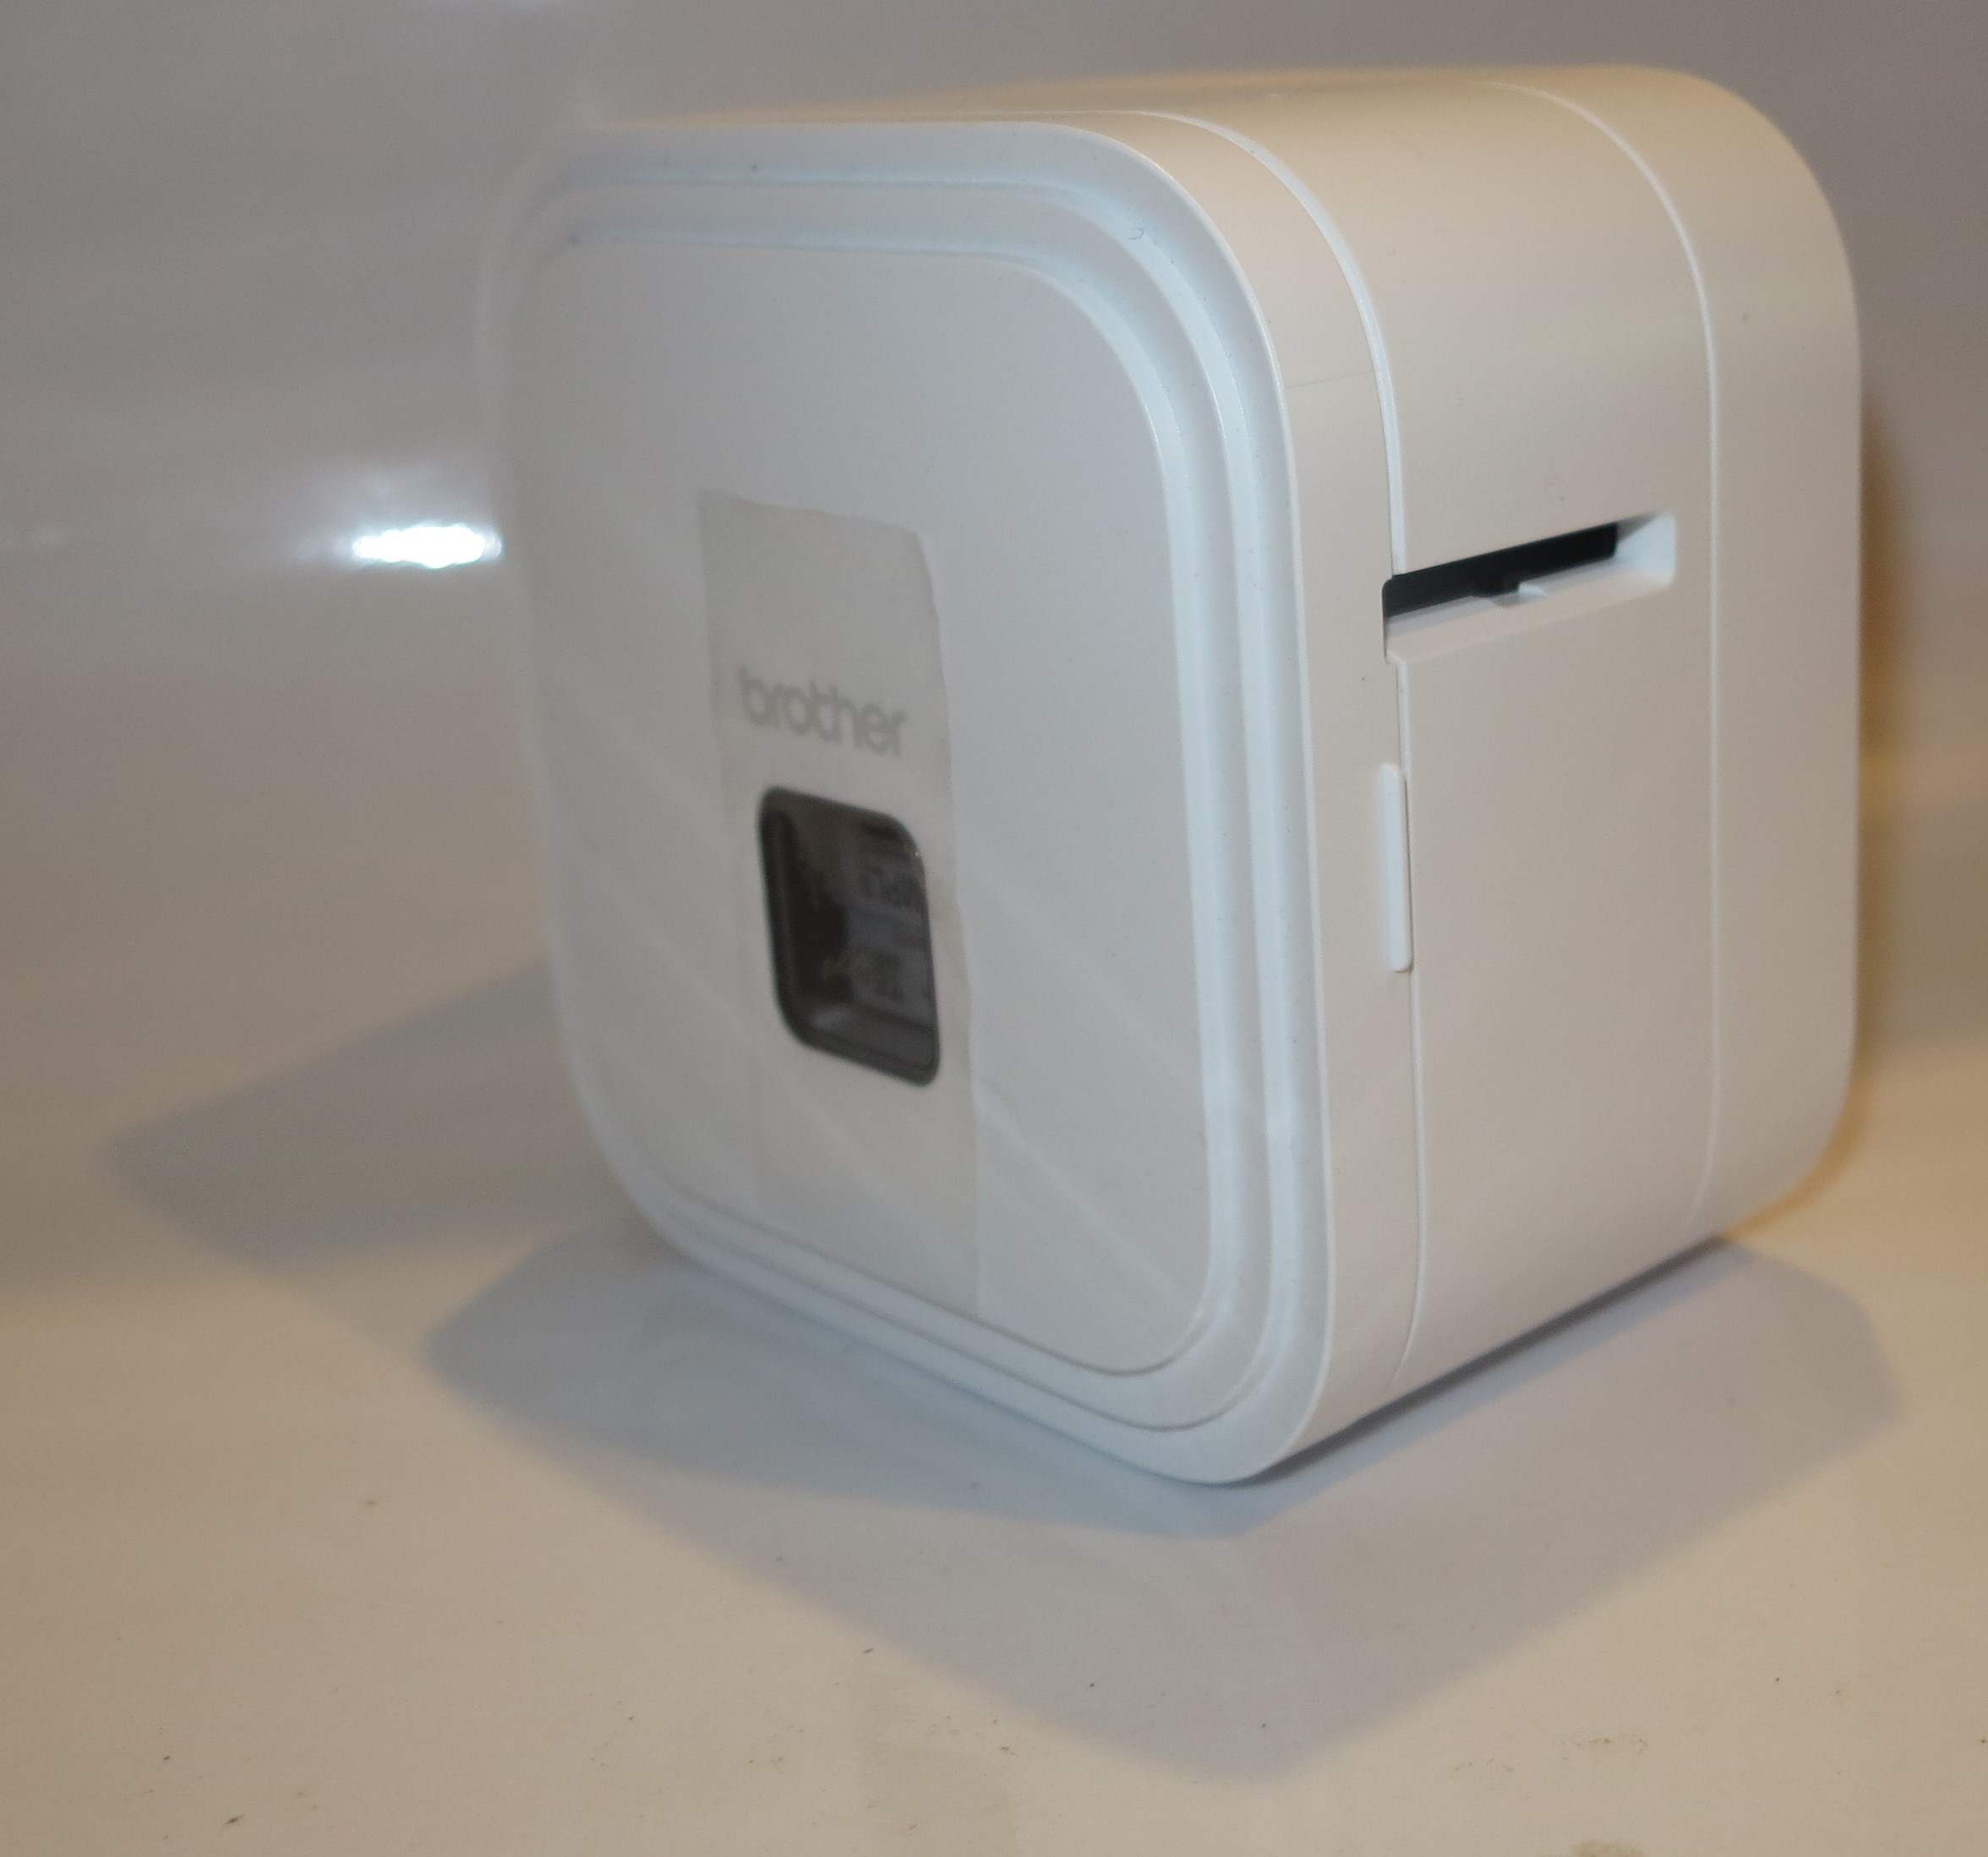 Product Review–Brother PT-P910BT Bluetooth label printer